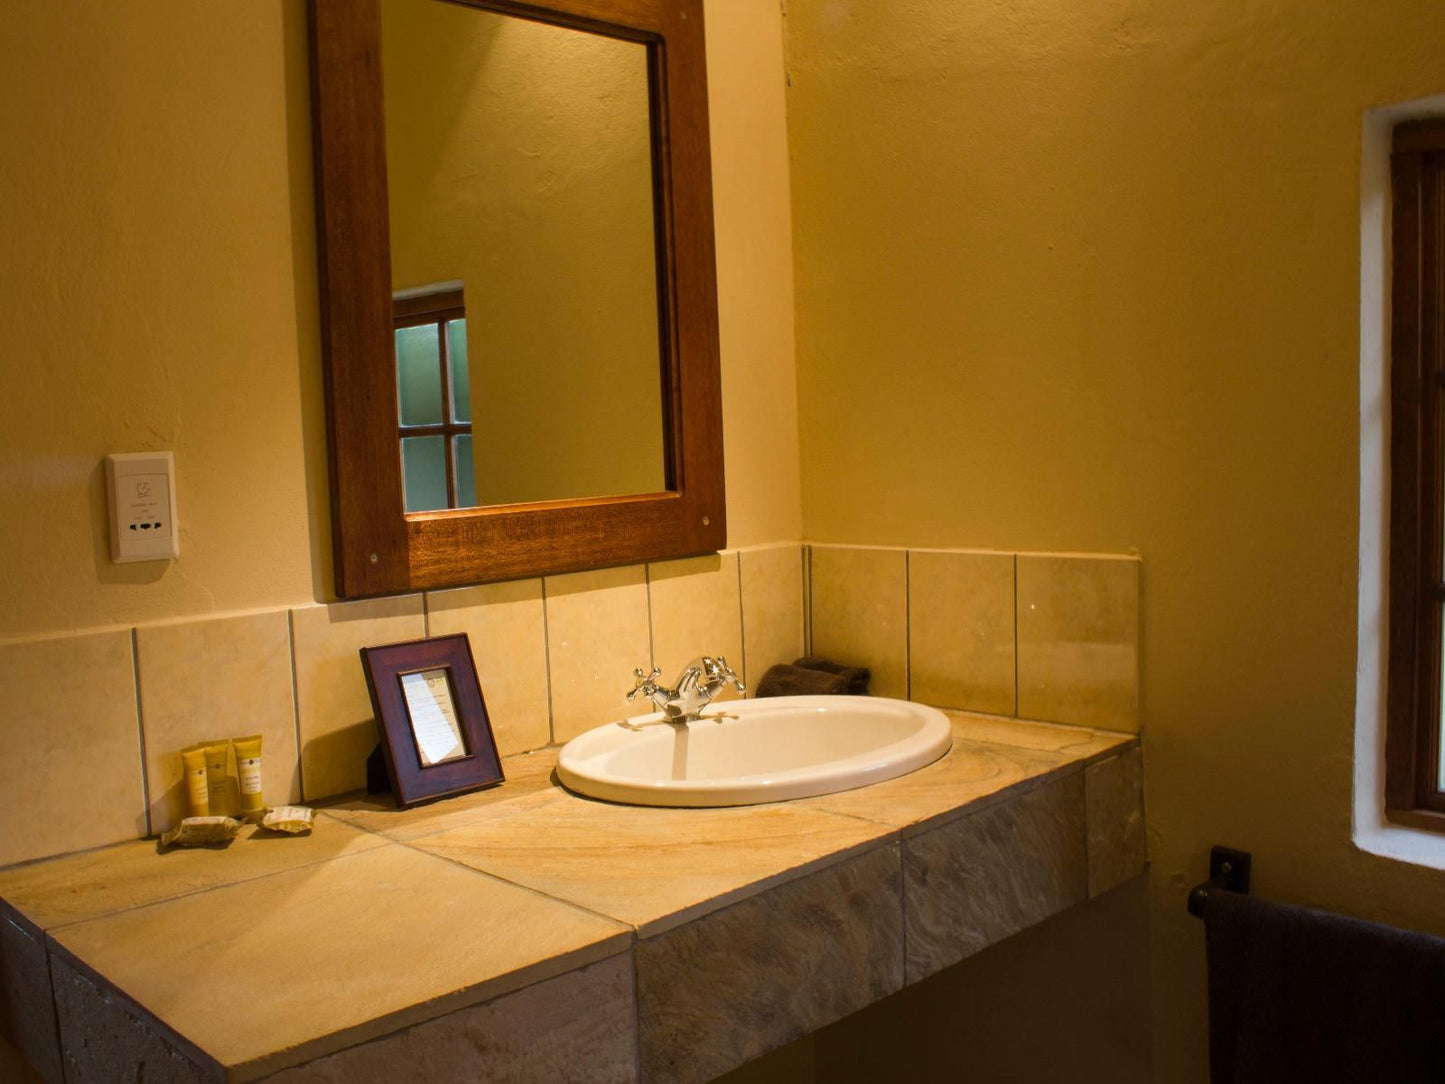 Kololo Game Reserve Vaalwater Limpopo Province South Africa Sepia Tones, Bathroom